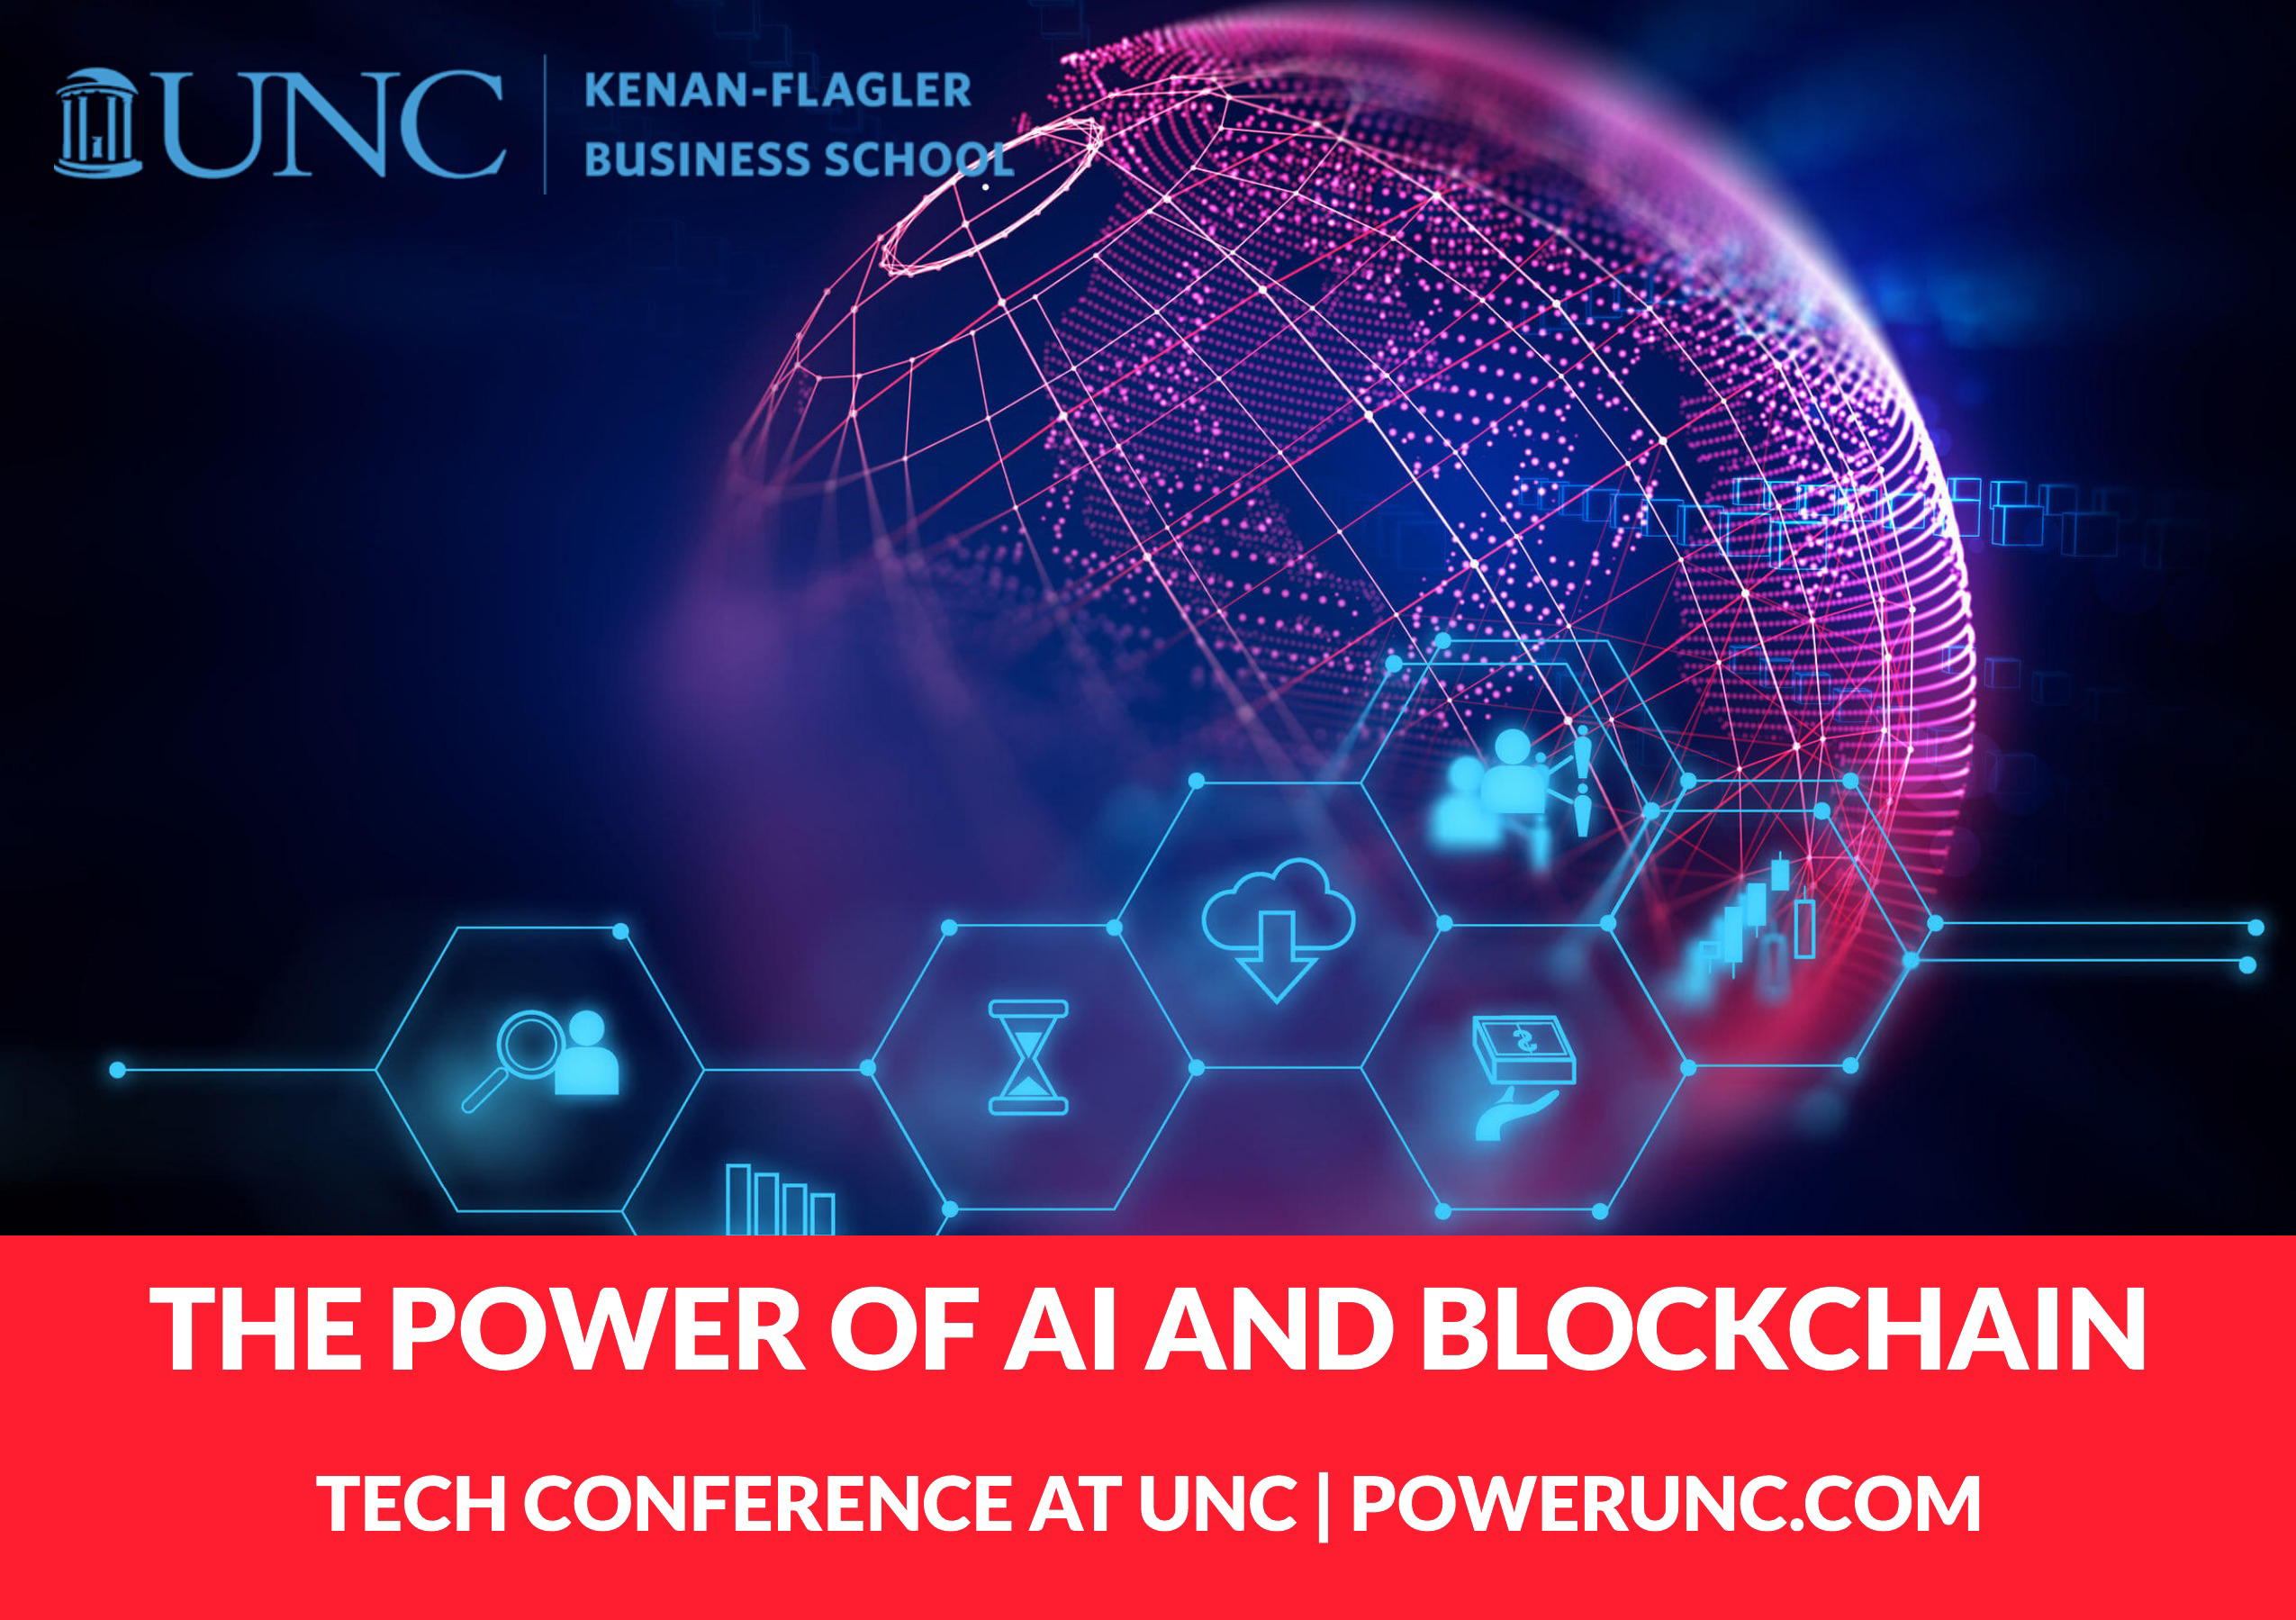 “The Power of Artificial Intelligence and Blockchain” Conference to Be